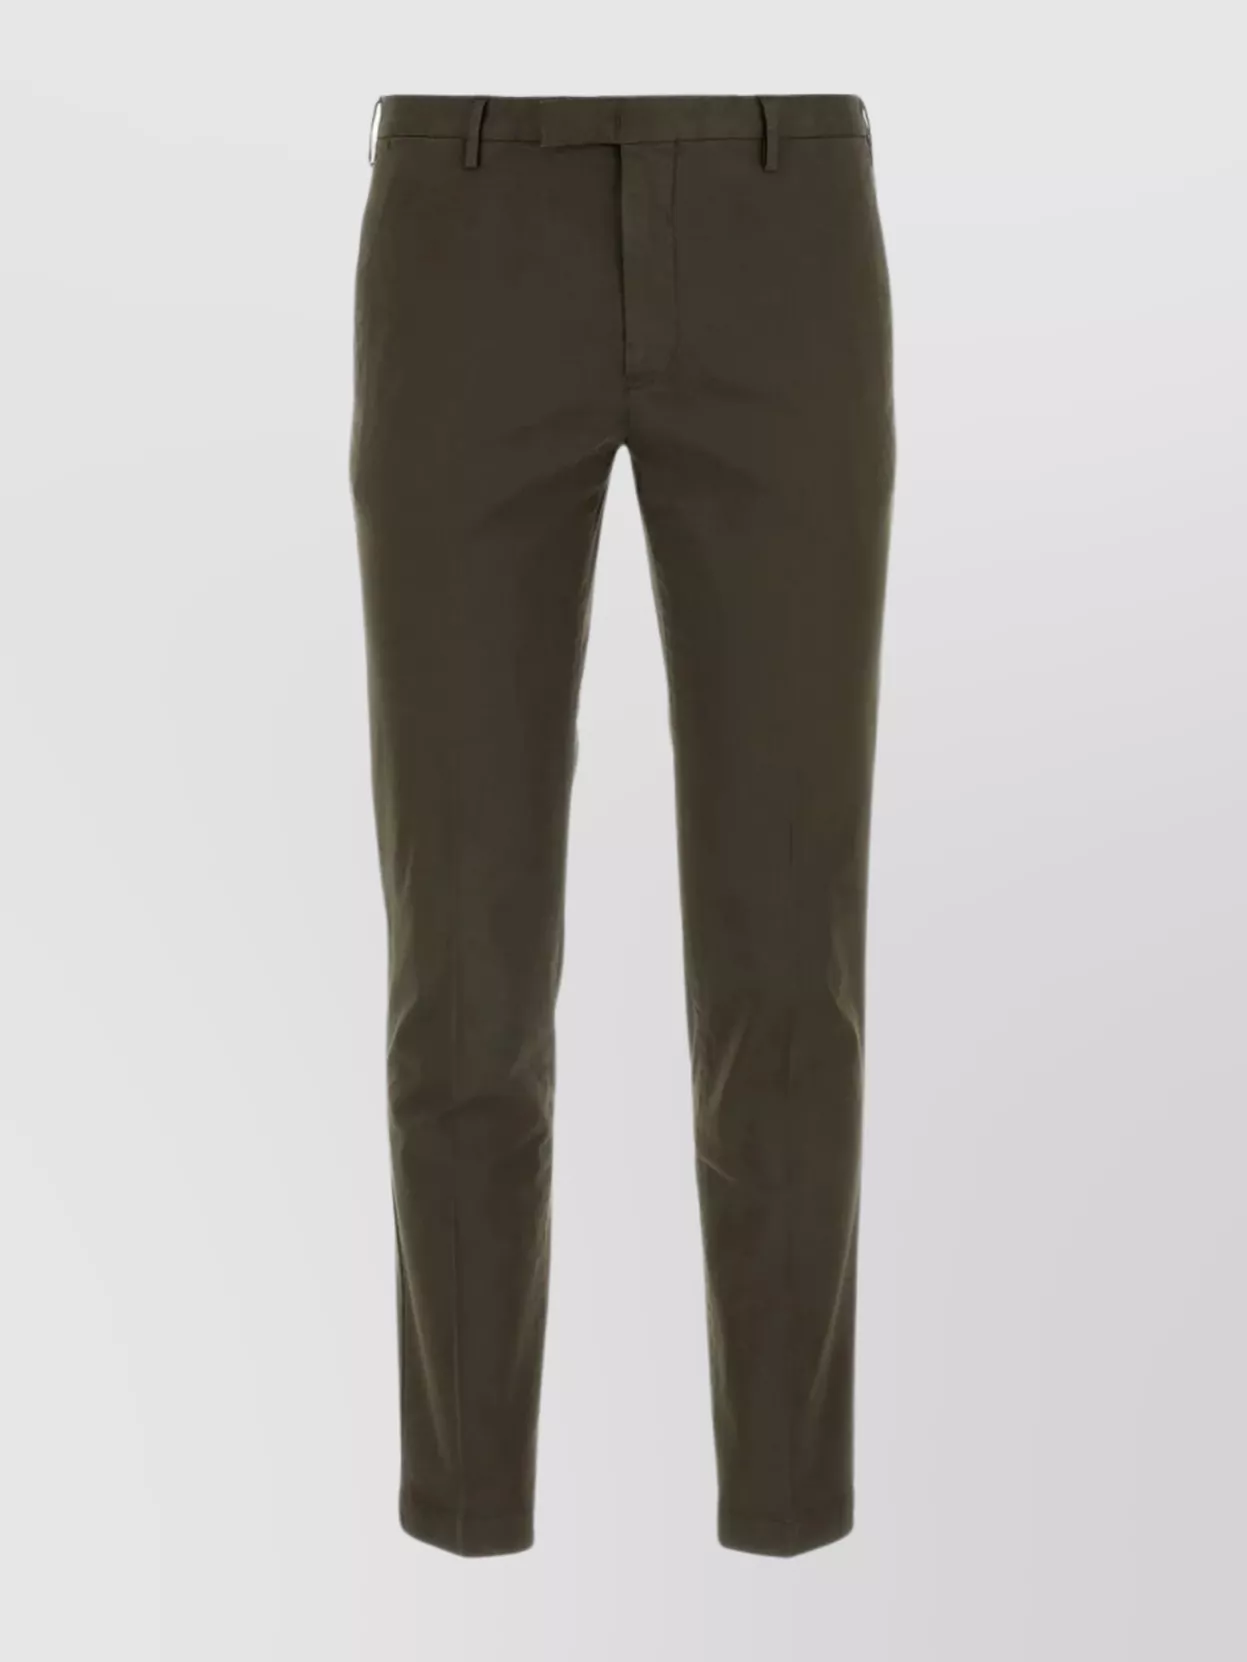 Shop Pt Torino Streamlined Stretch Cotton Trousers With Waist Belt Loops